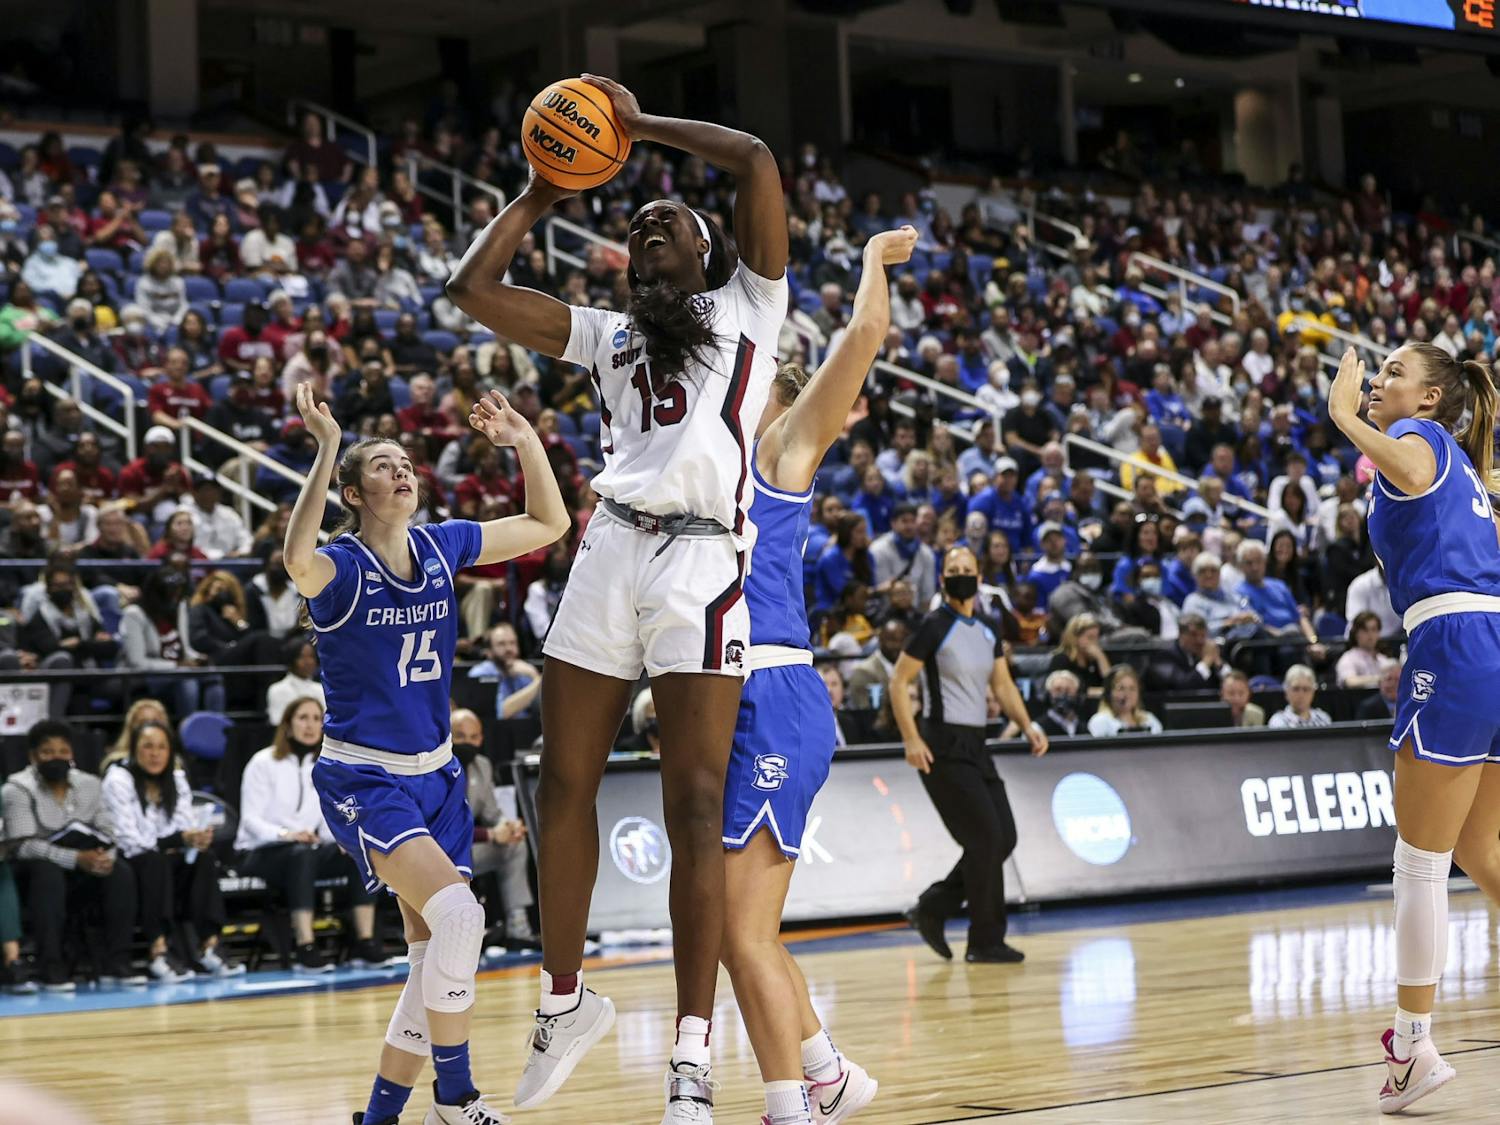 Junior forward Laeticia Amihere shooting a layup during the third quarter of South Carolina's 80-50 victory over Creighton in the Elite Eight on Sunday, March 27, 2022.